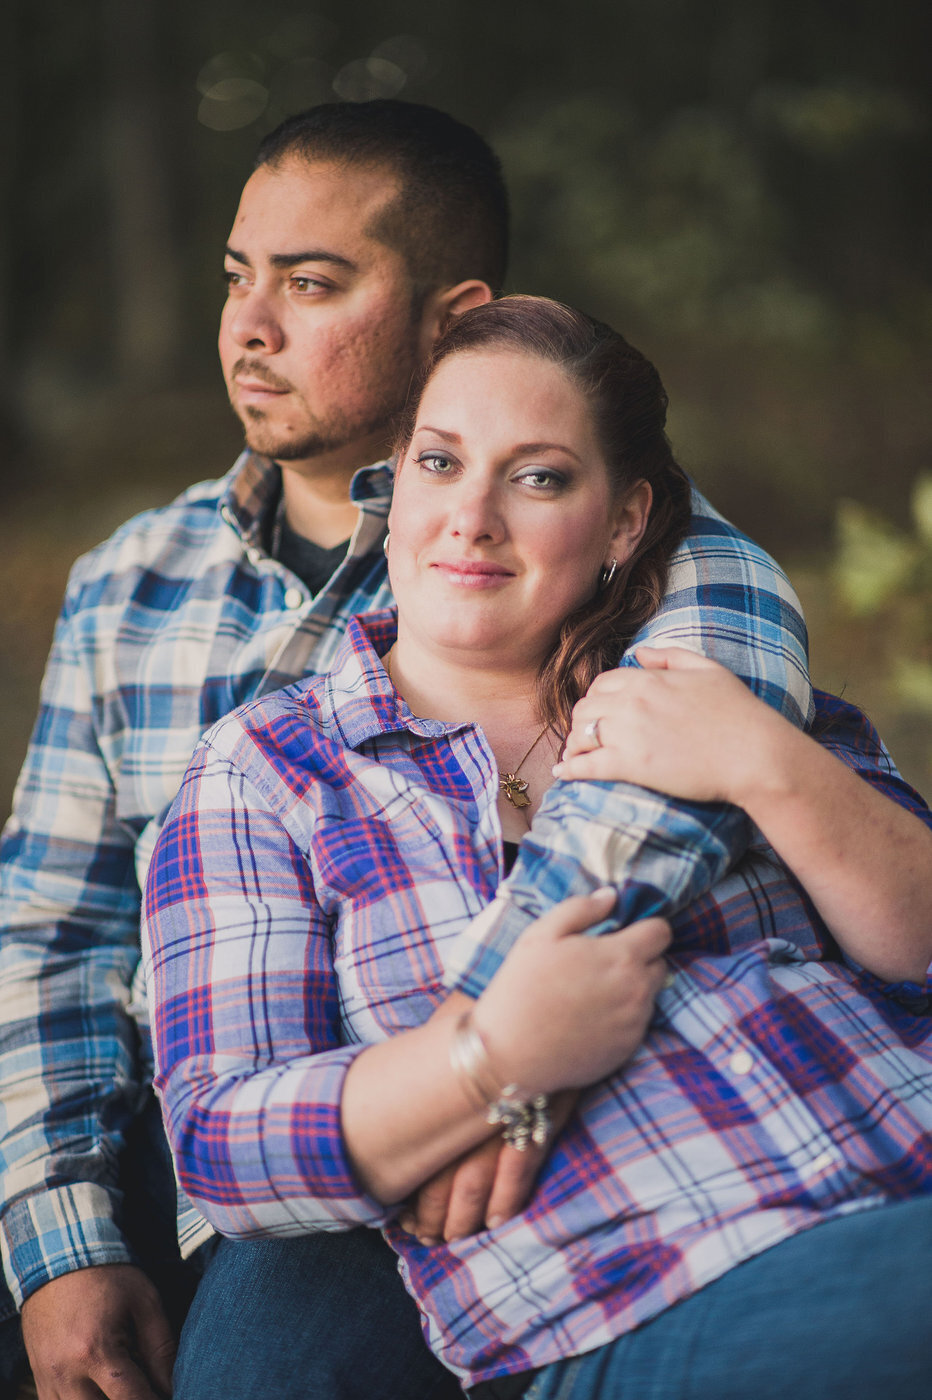 J_Guiles_Photography_Engagement (22)